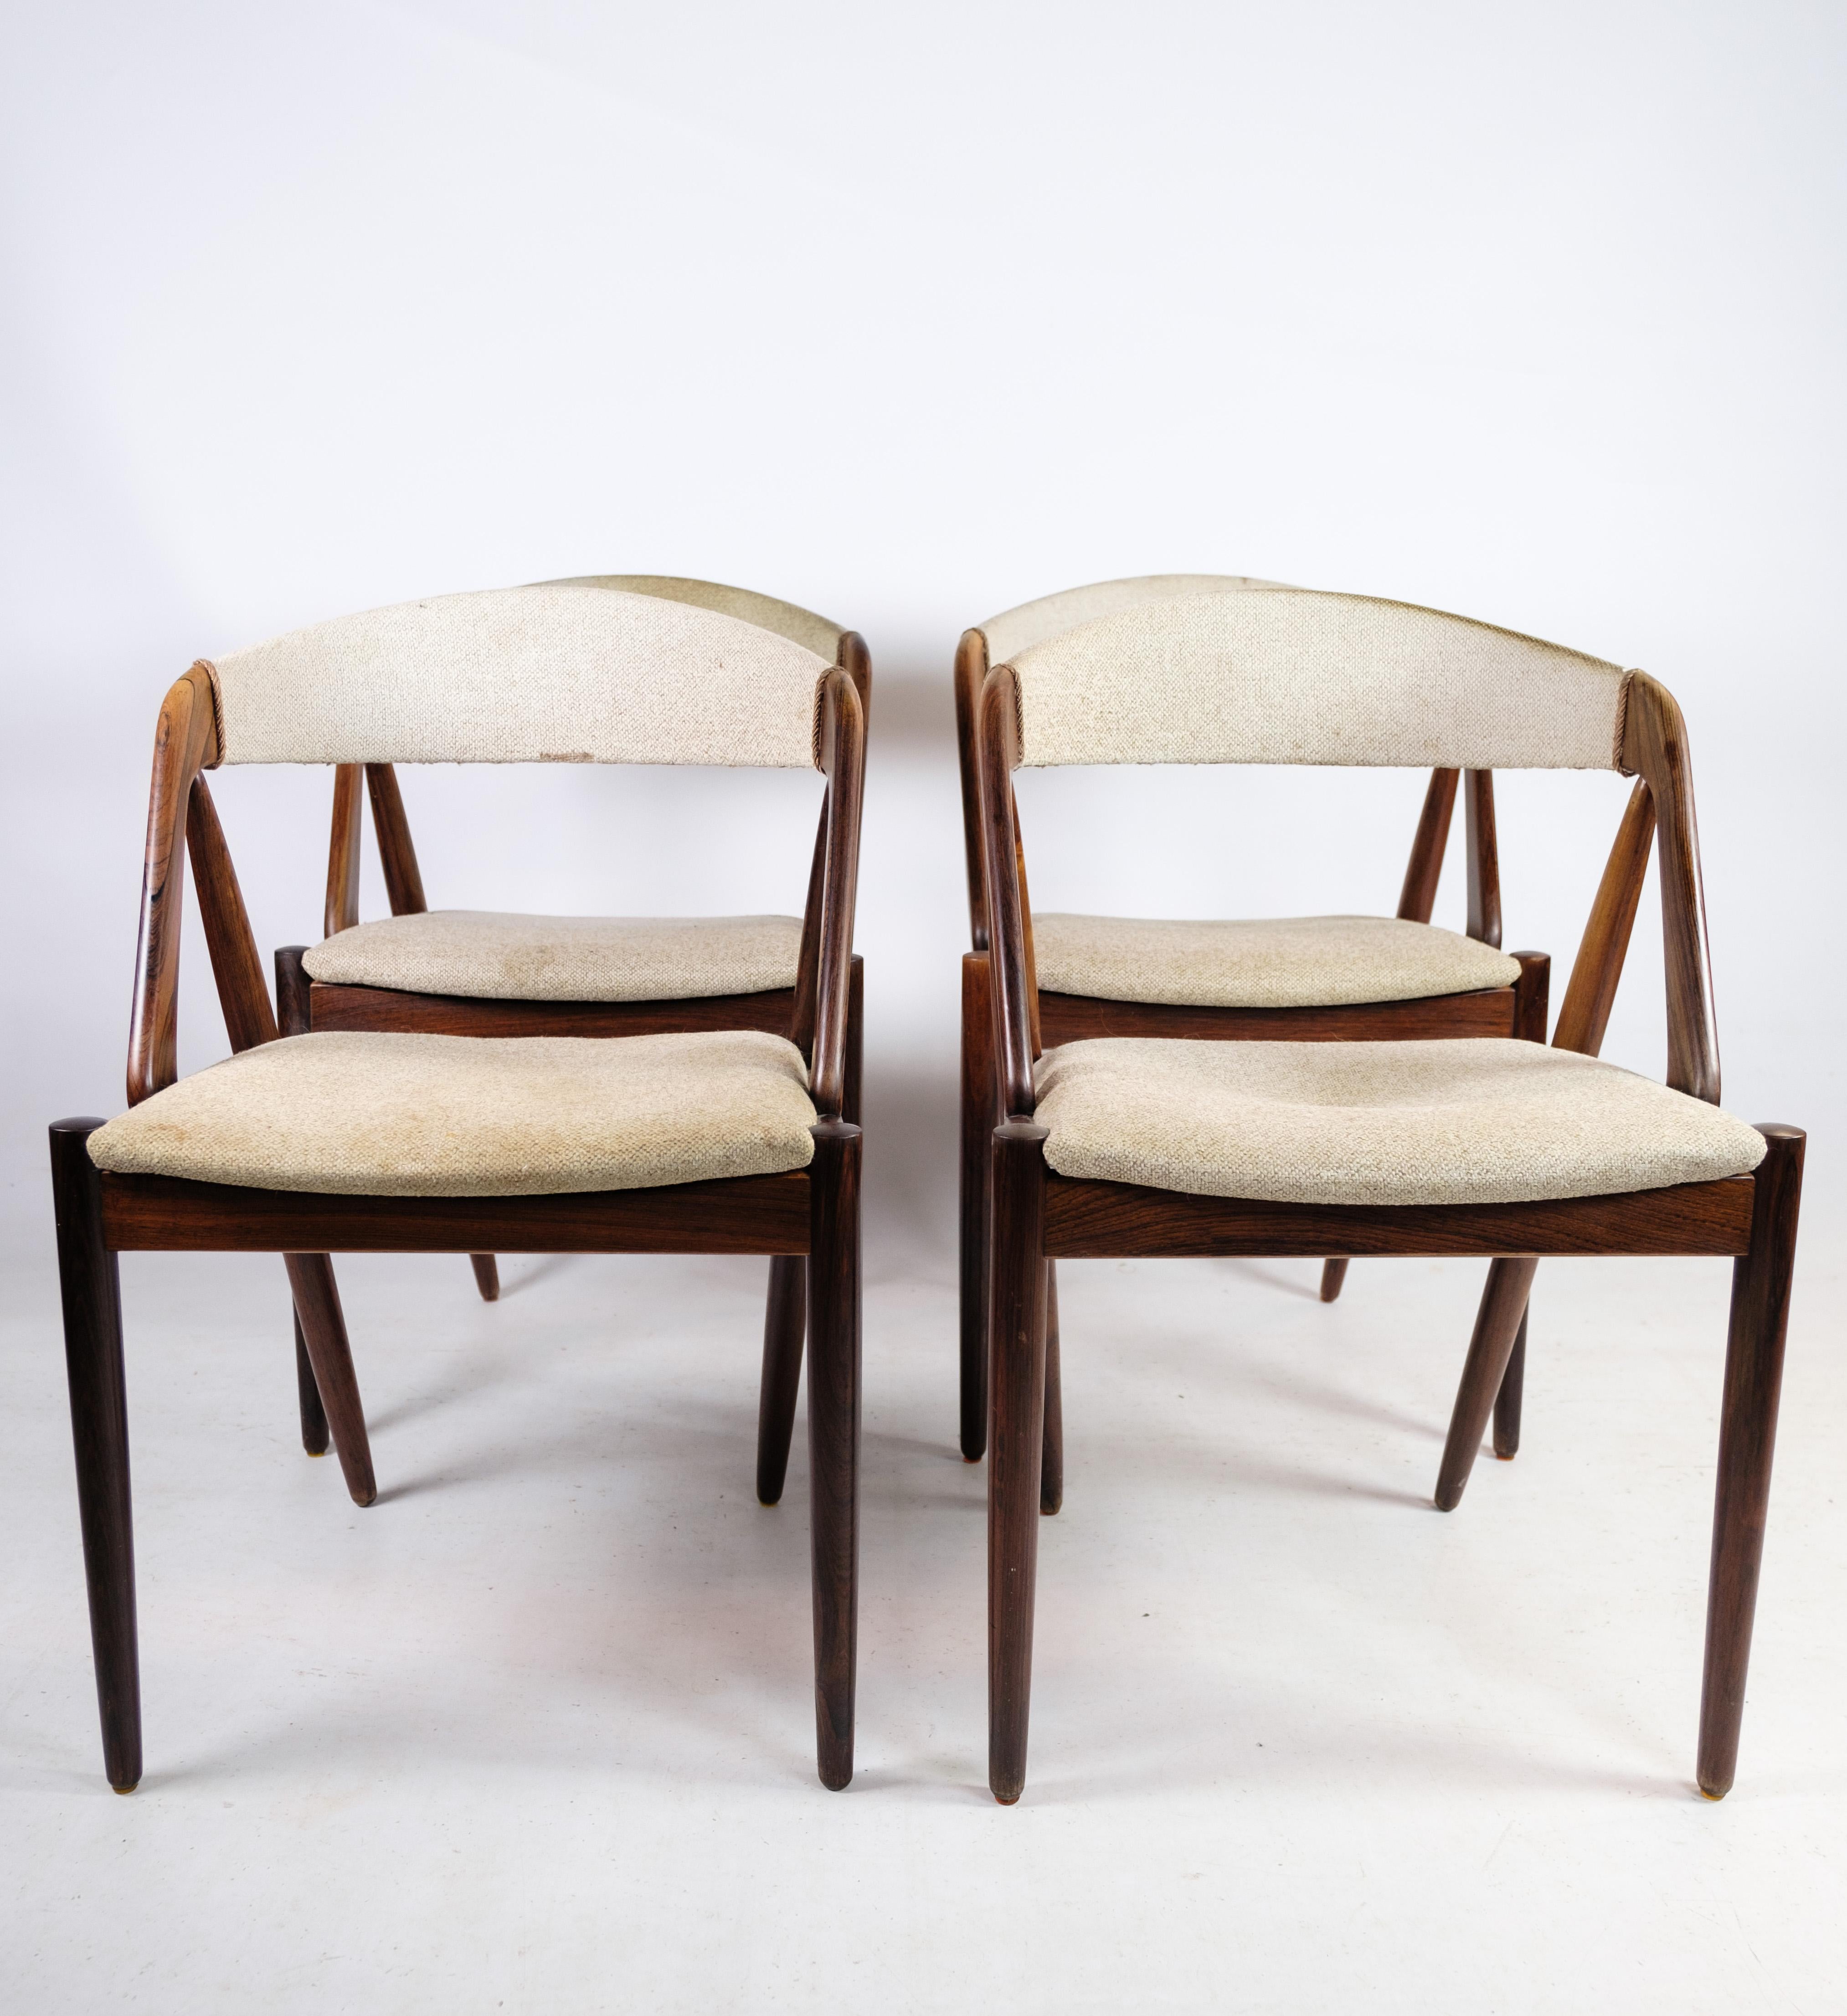 Mid-Century Modern Dining Room Chairs Model 31 Made In Rosewood By Kai Kristiansen From 1960s For Sale